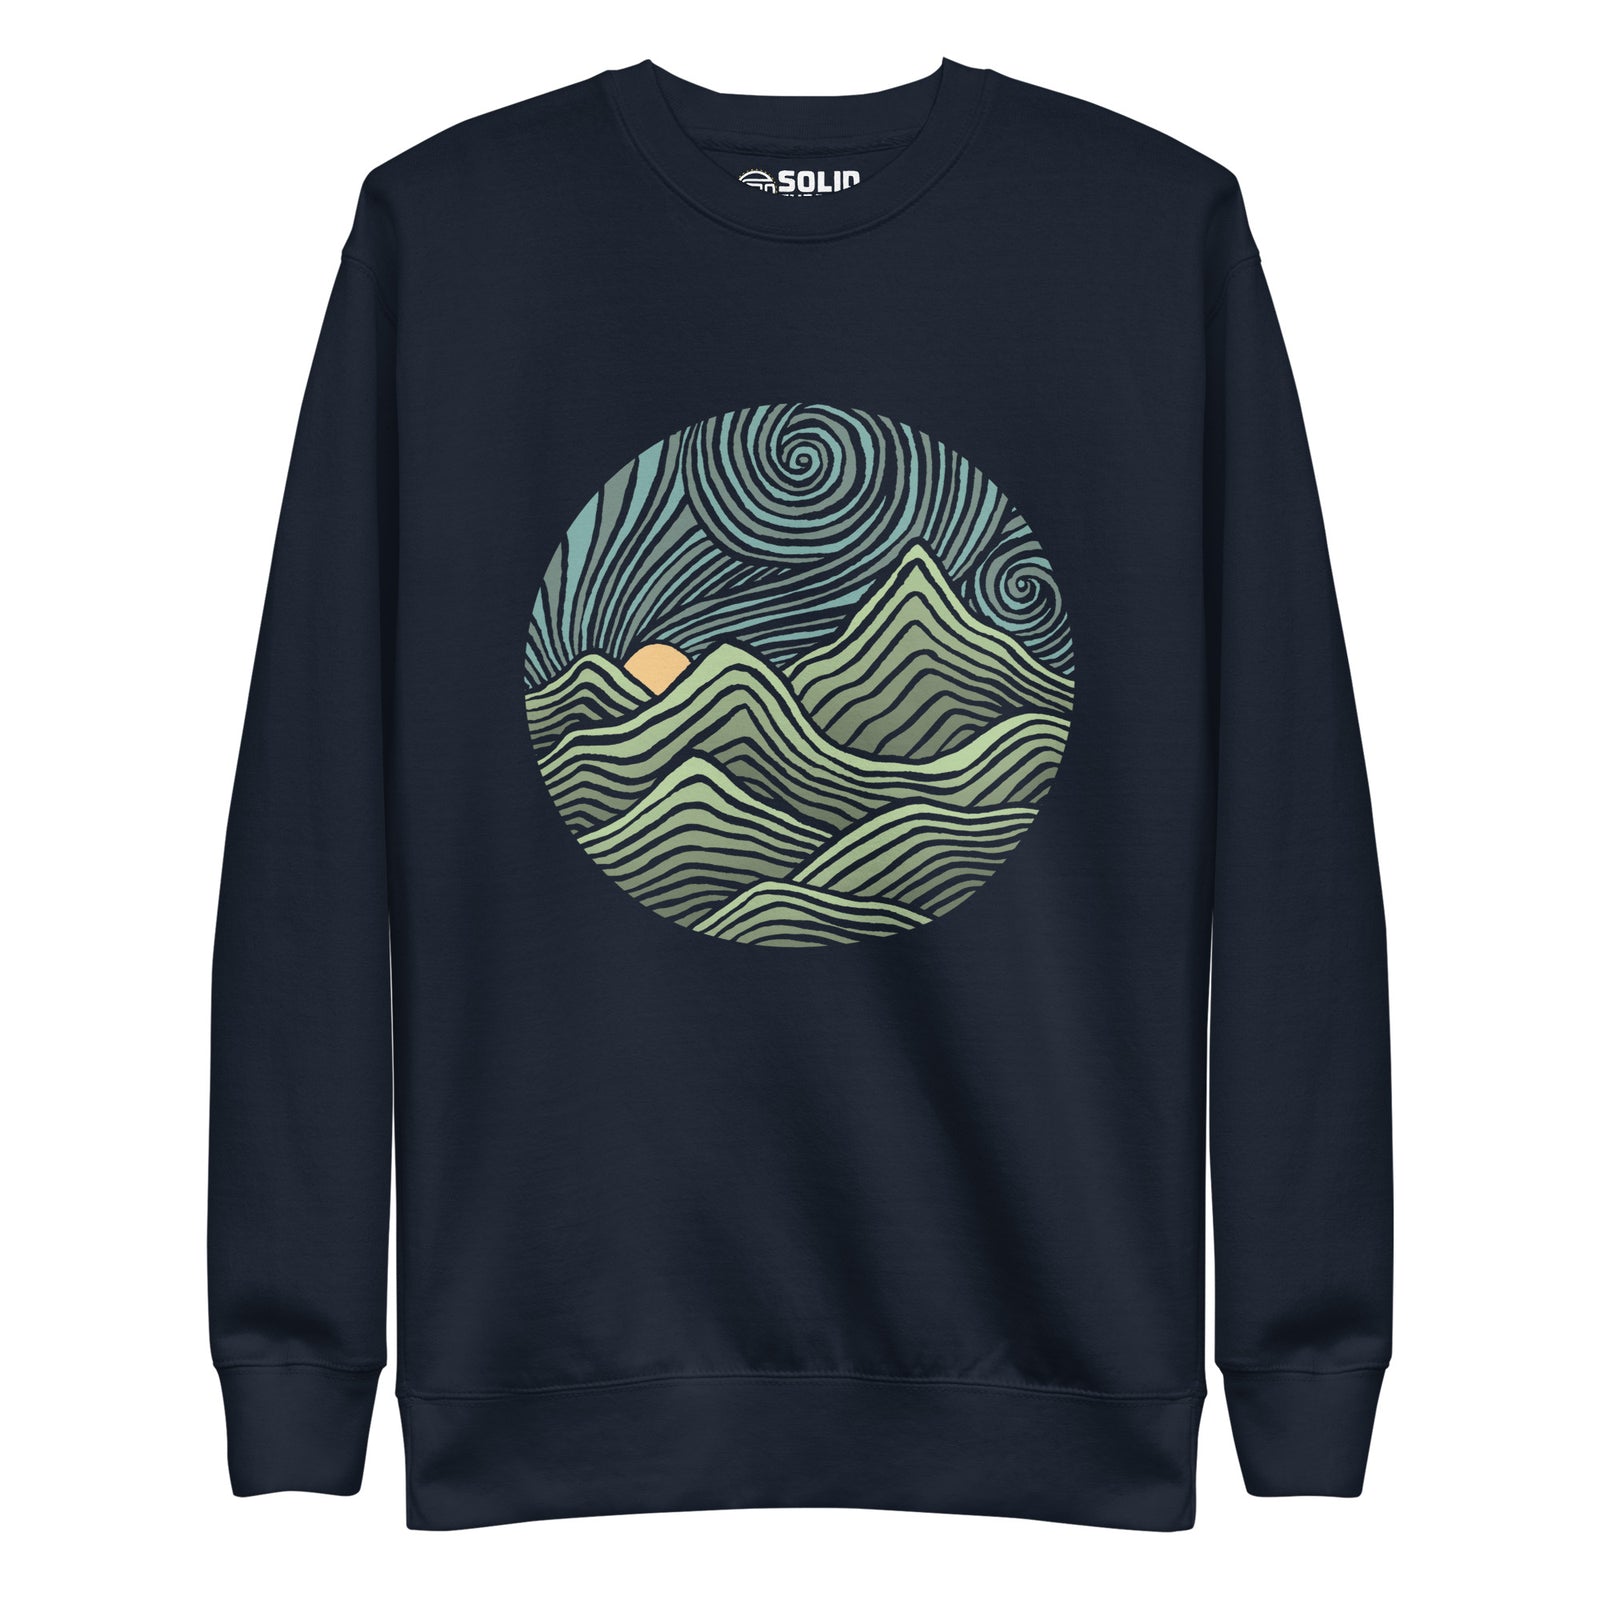 Swirly Mountains | Design By Dylan Fant Cool Classic Sweatshirt | Vintage Nature Fleece | Solid Threads